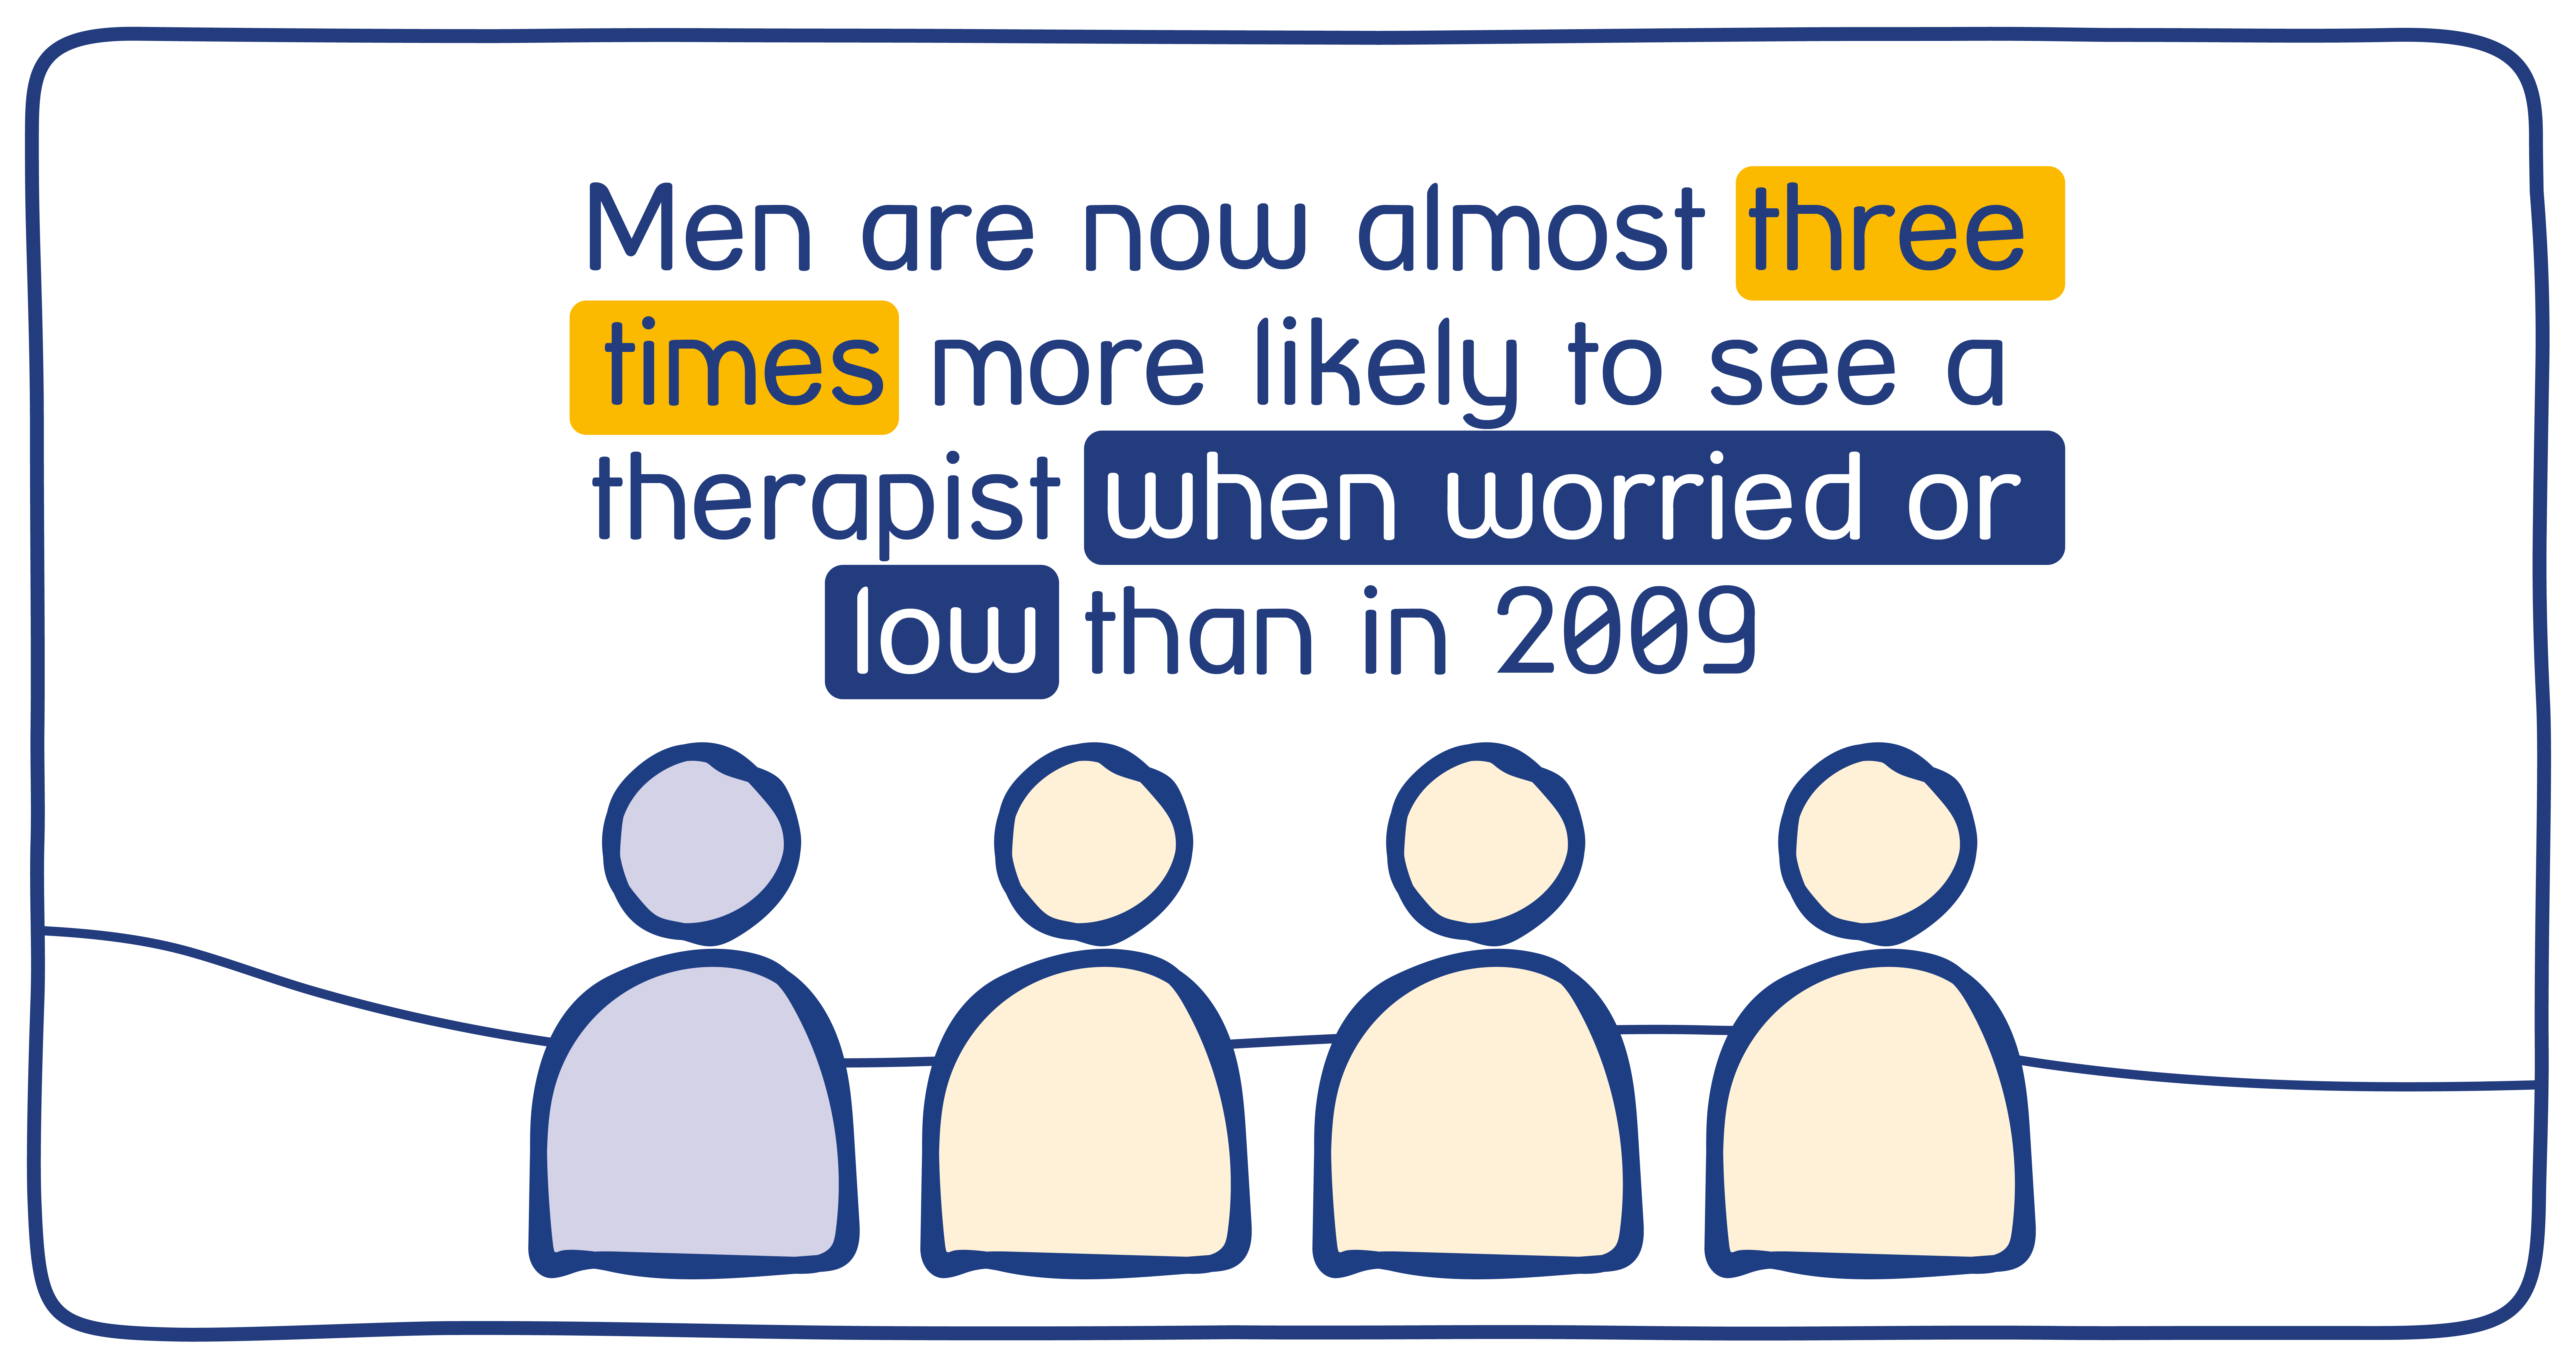 Men are more likely to see a therapist when worried or low